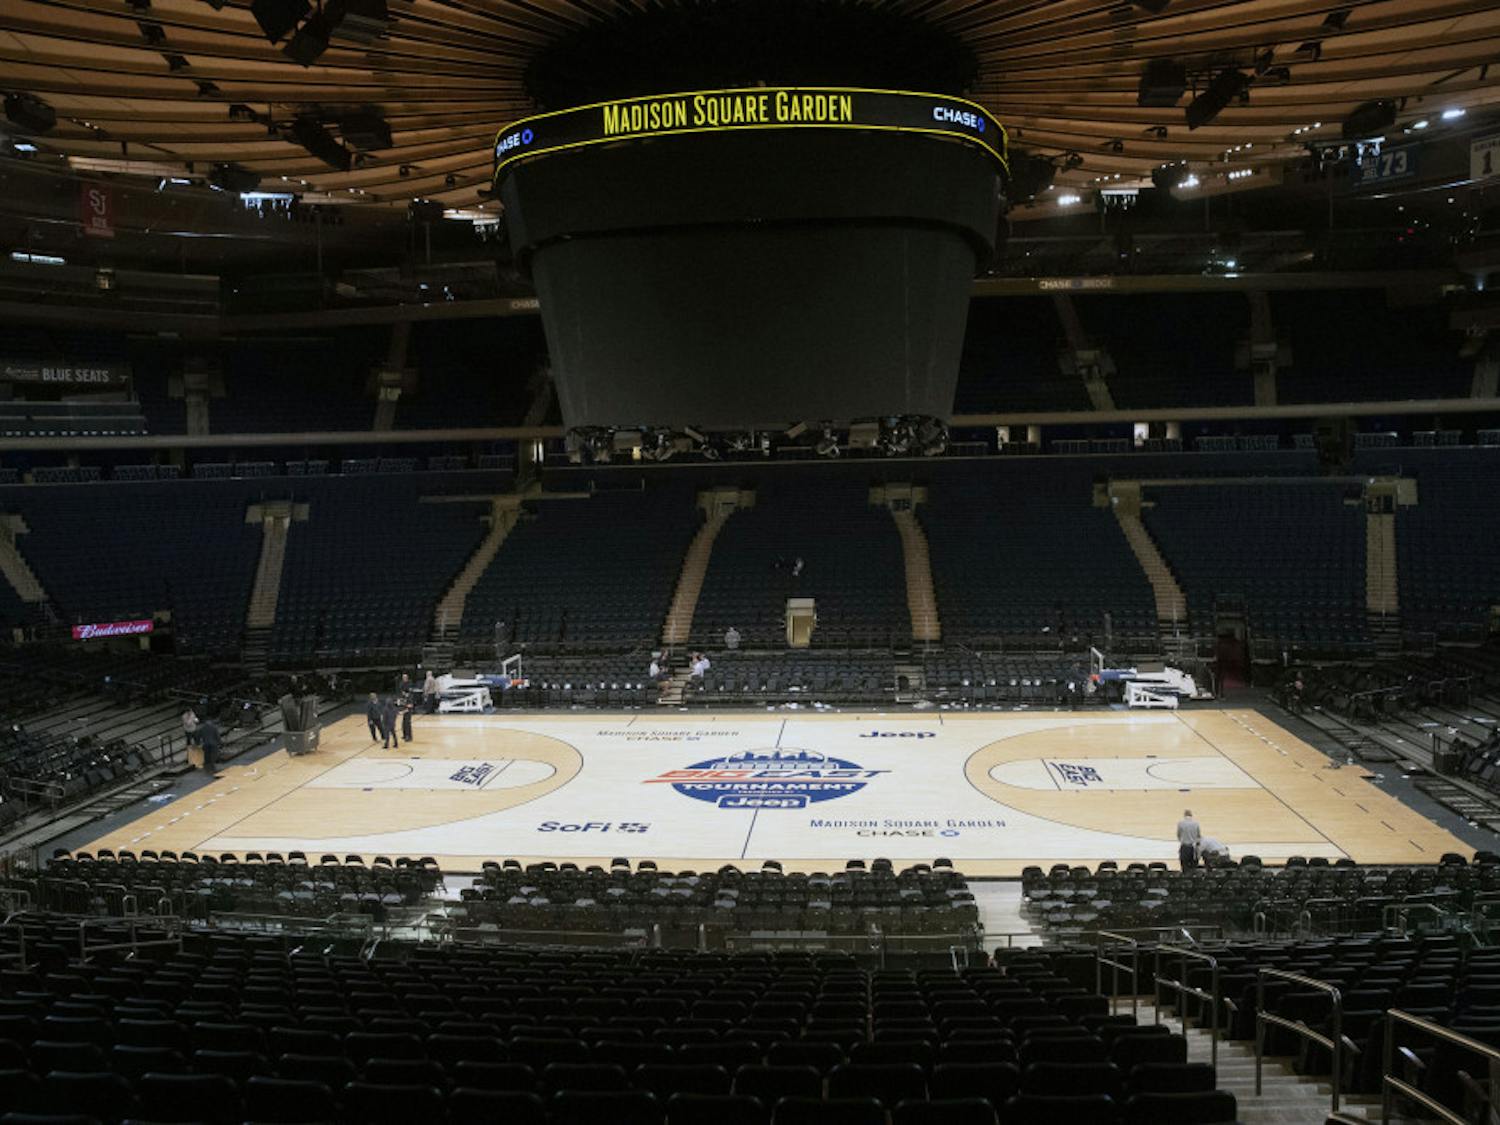 Madison Square Garden is shown after NCAA college basketball games in the men's Big East Conference tournament were cancelled due to concerns about the coronavirus, Thursday, March 12, 2020, in New York. The major conferences in college sports have all cancelled their basketball tournaments because of the new coronavirus, putting the celebrated NCAA Tournament in doubt. (AP Photo/Mary Altaffer)